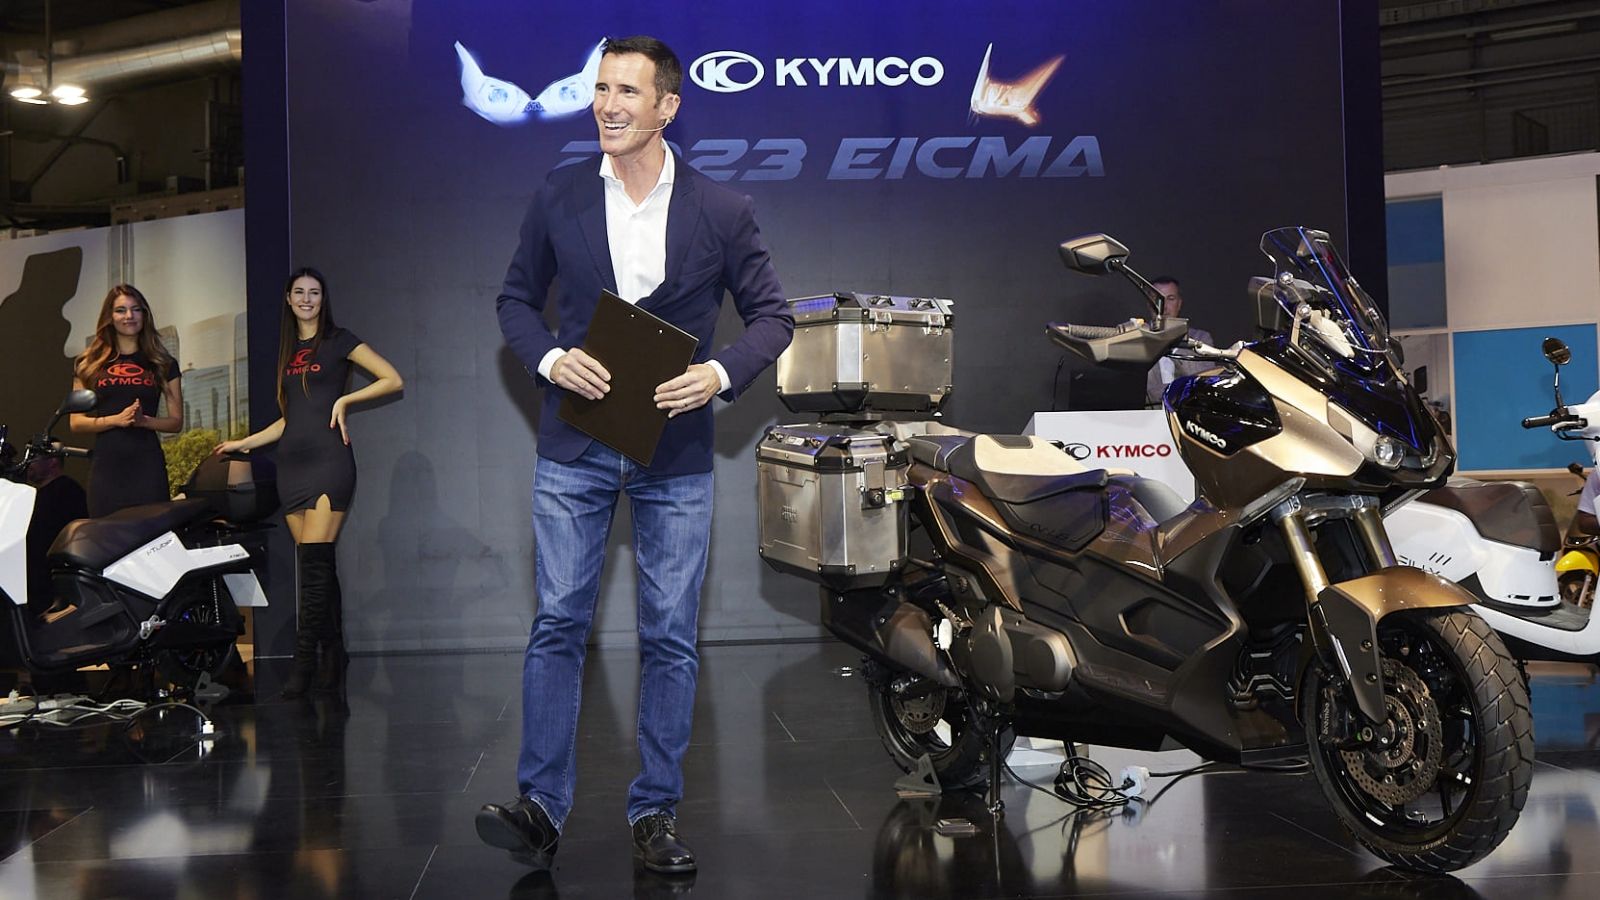 Kymco's New CV-L6 Adventure Scooter: 10 Things To Know